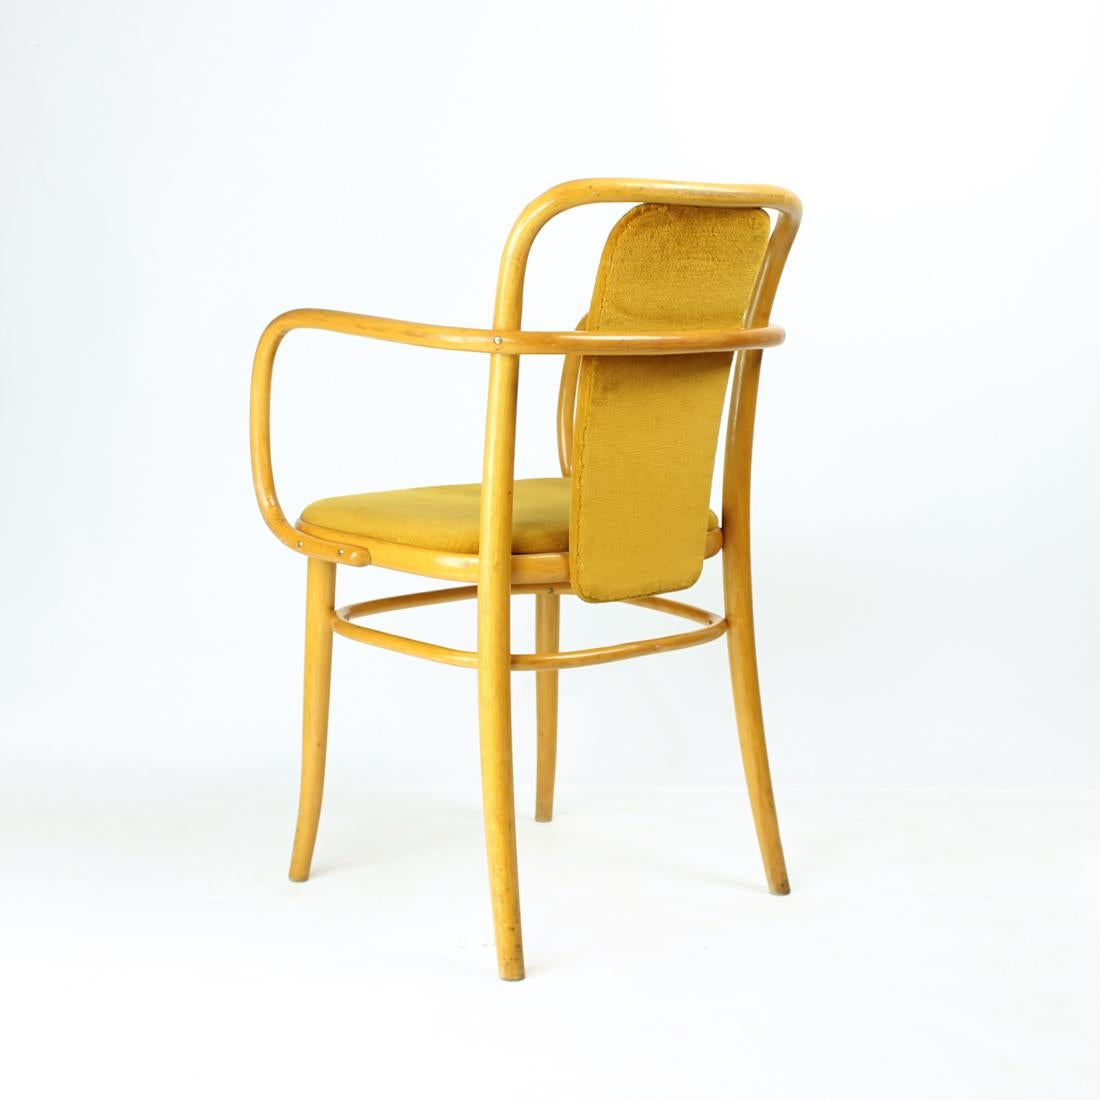 Mid-20th Century Ton Bentwood Armchair With Gold Velvet, Czechoslovakia 1930s, 40 Available For Sale